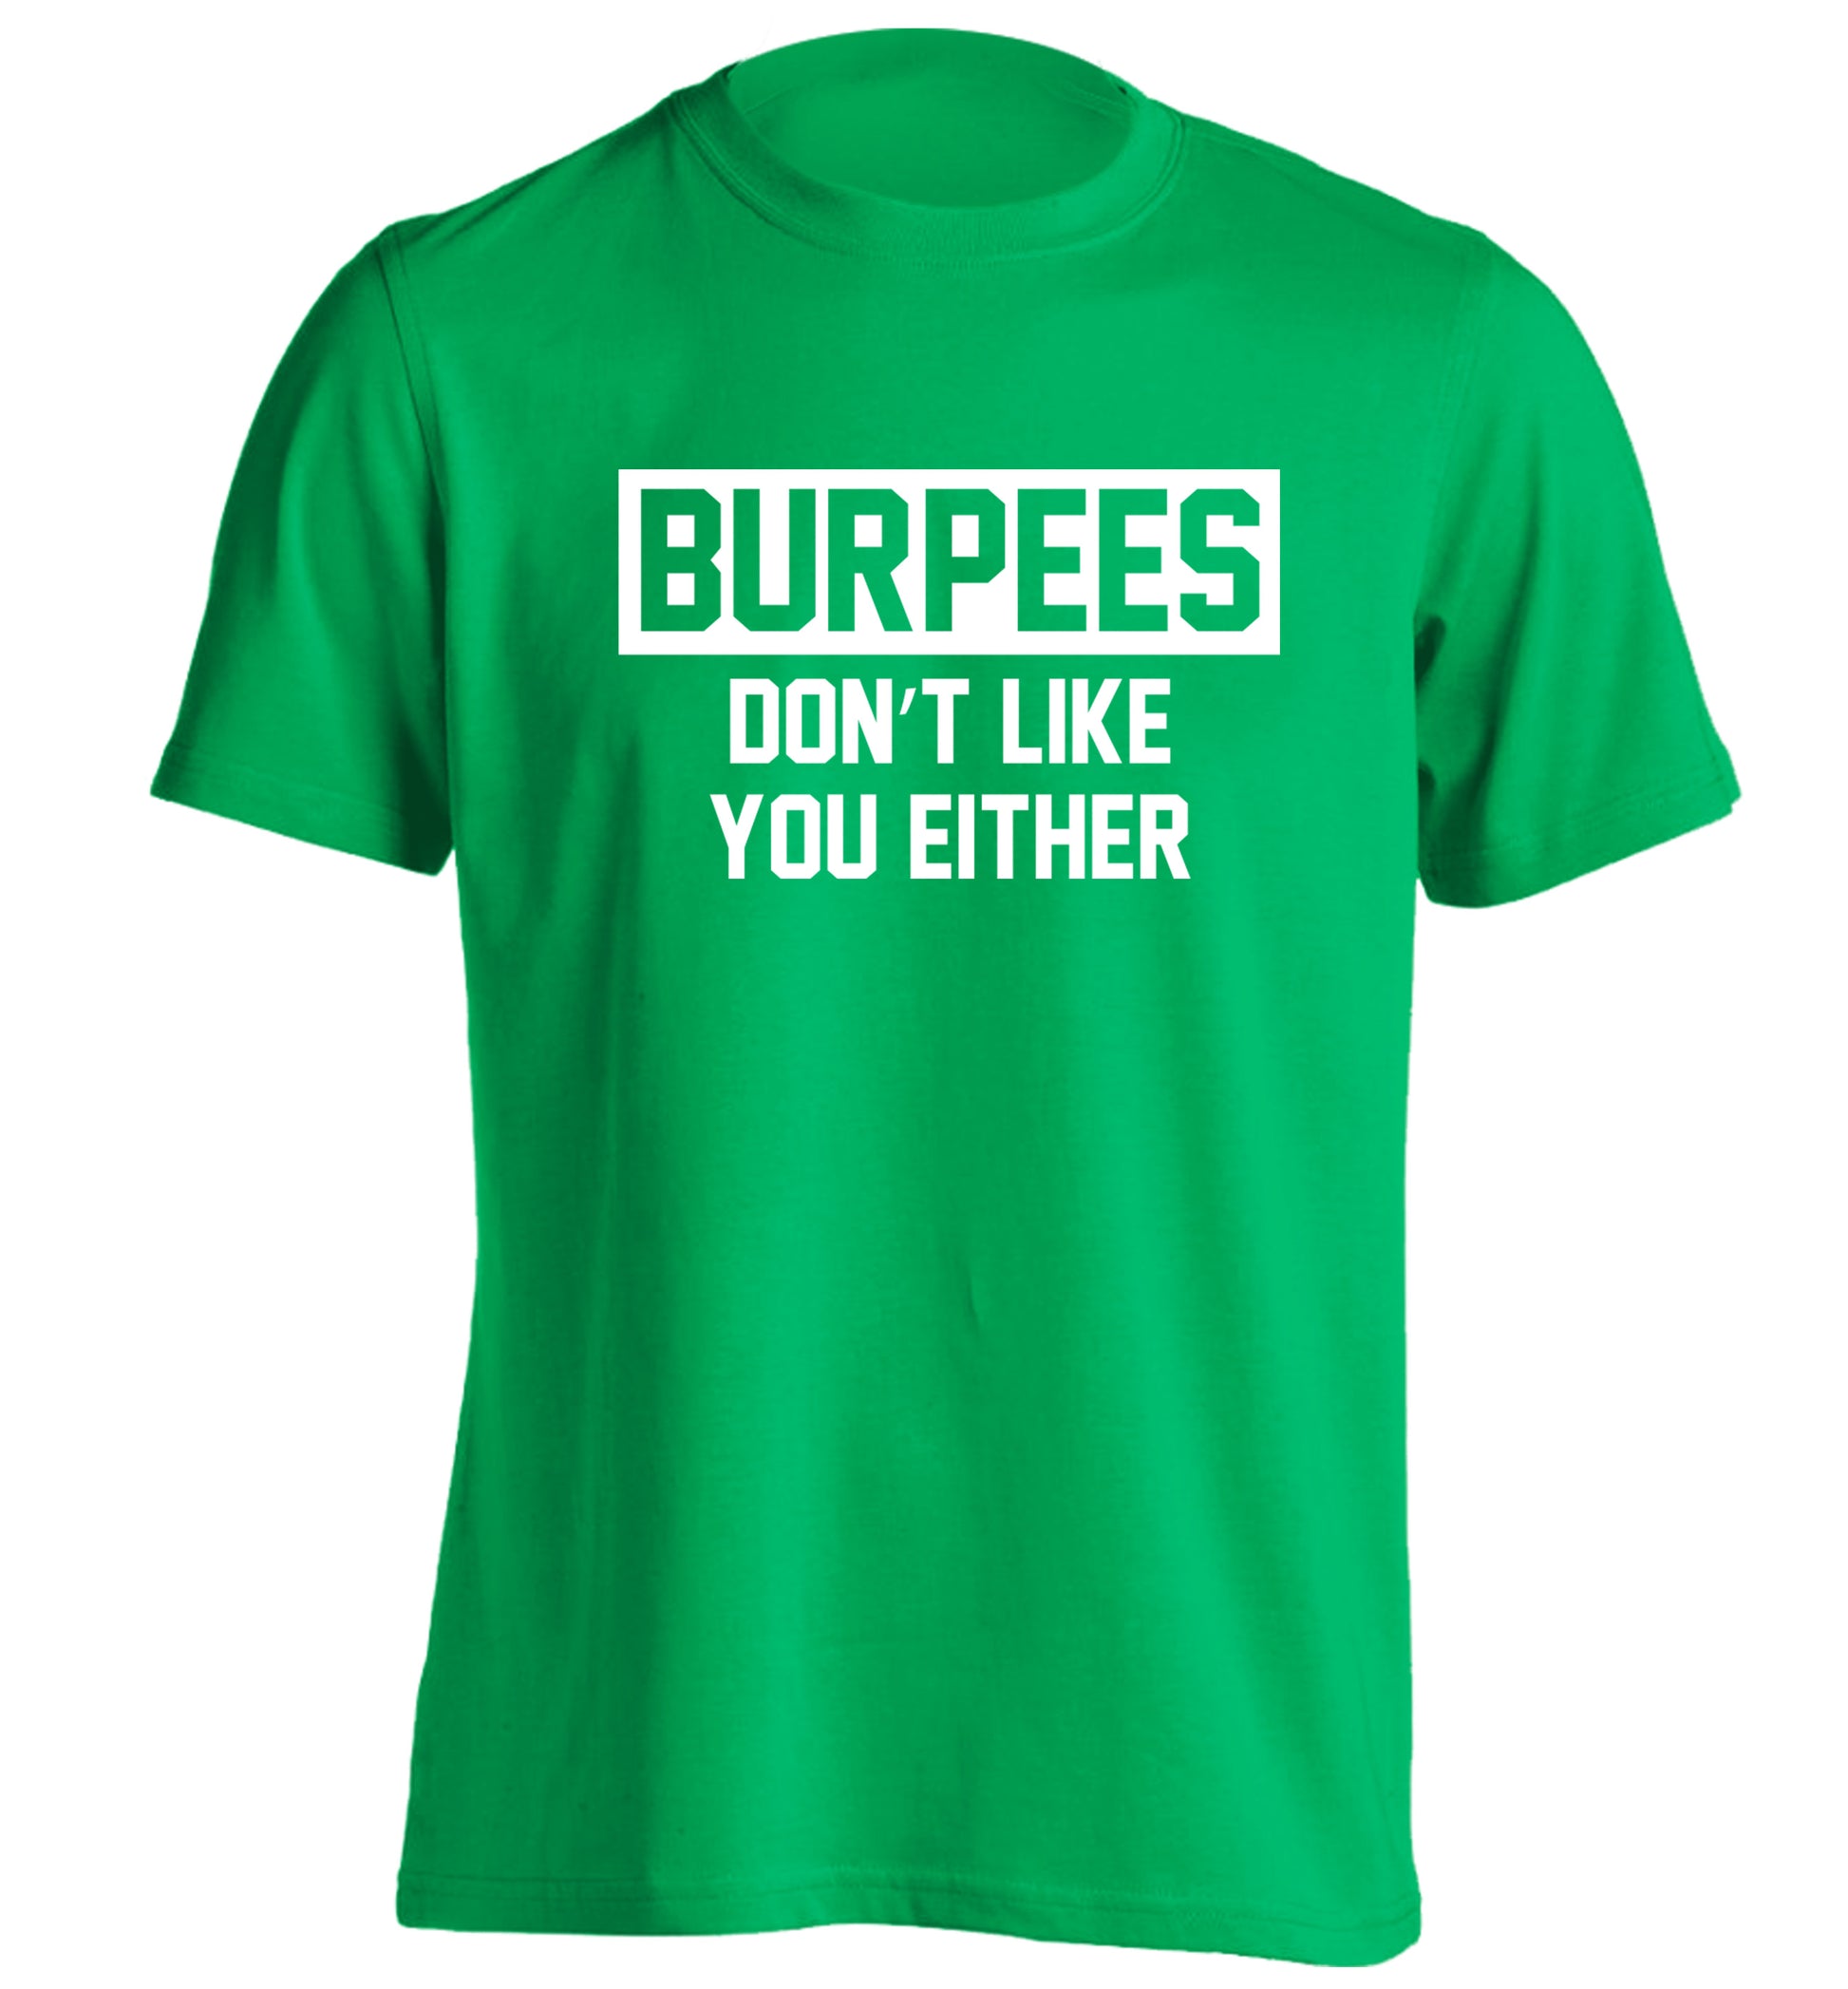 Burpees don't like you either adults unisex green Tshirt 2XL